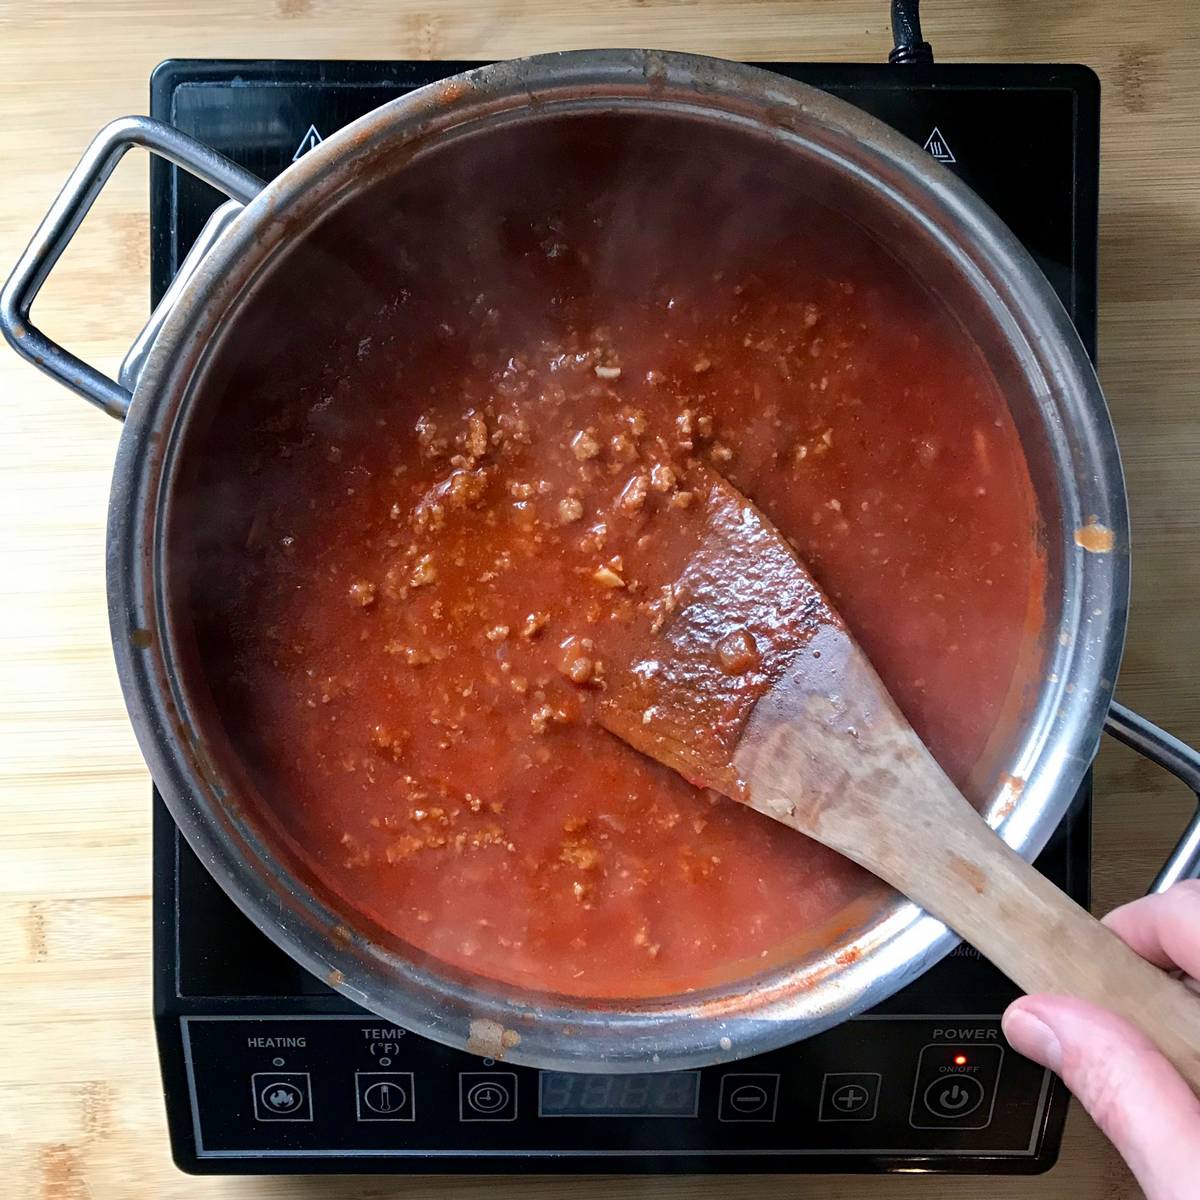 Cooked ground meat added to a simmering tomato sauce.